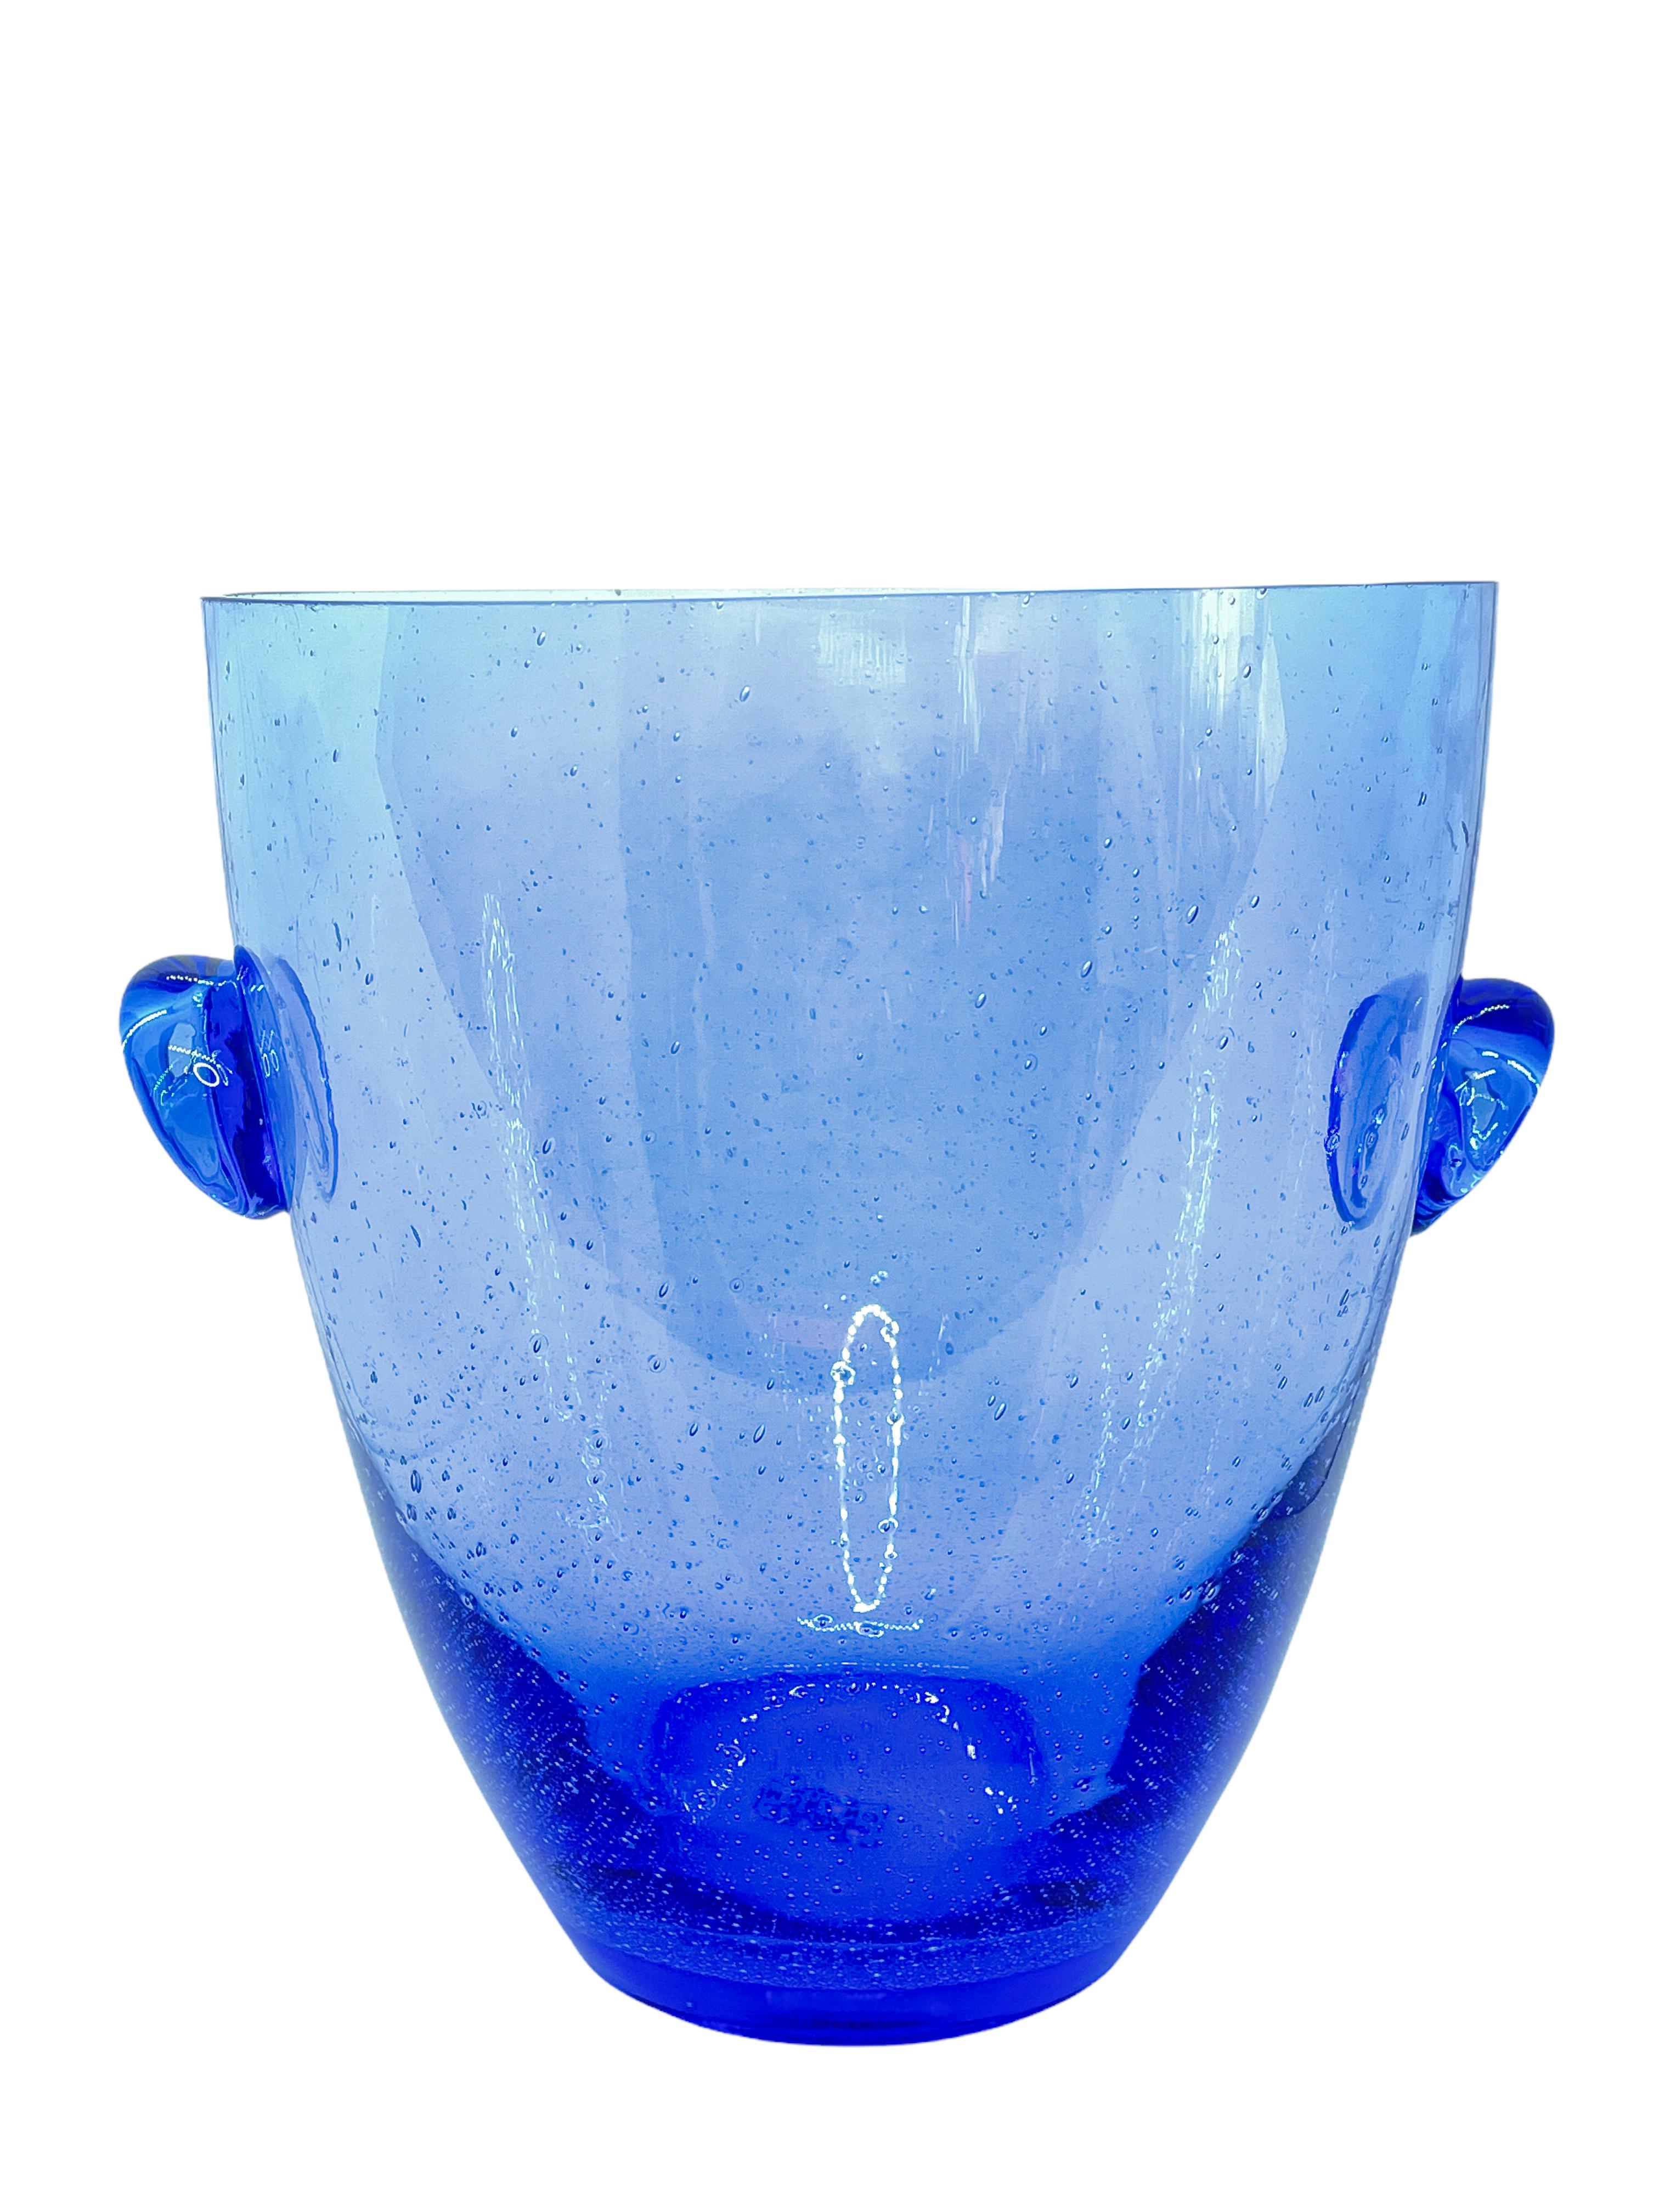 A nice barware item from Murano Italy, made in the 1980s. An all original Glass item to display in your bar or just on a cupboard with a bottle of wine or champagne. Mouthblown glass, with small little air bubbles inside and little scratches from